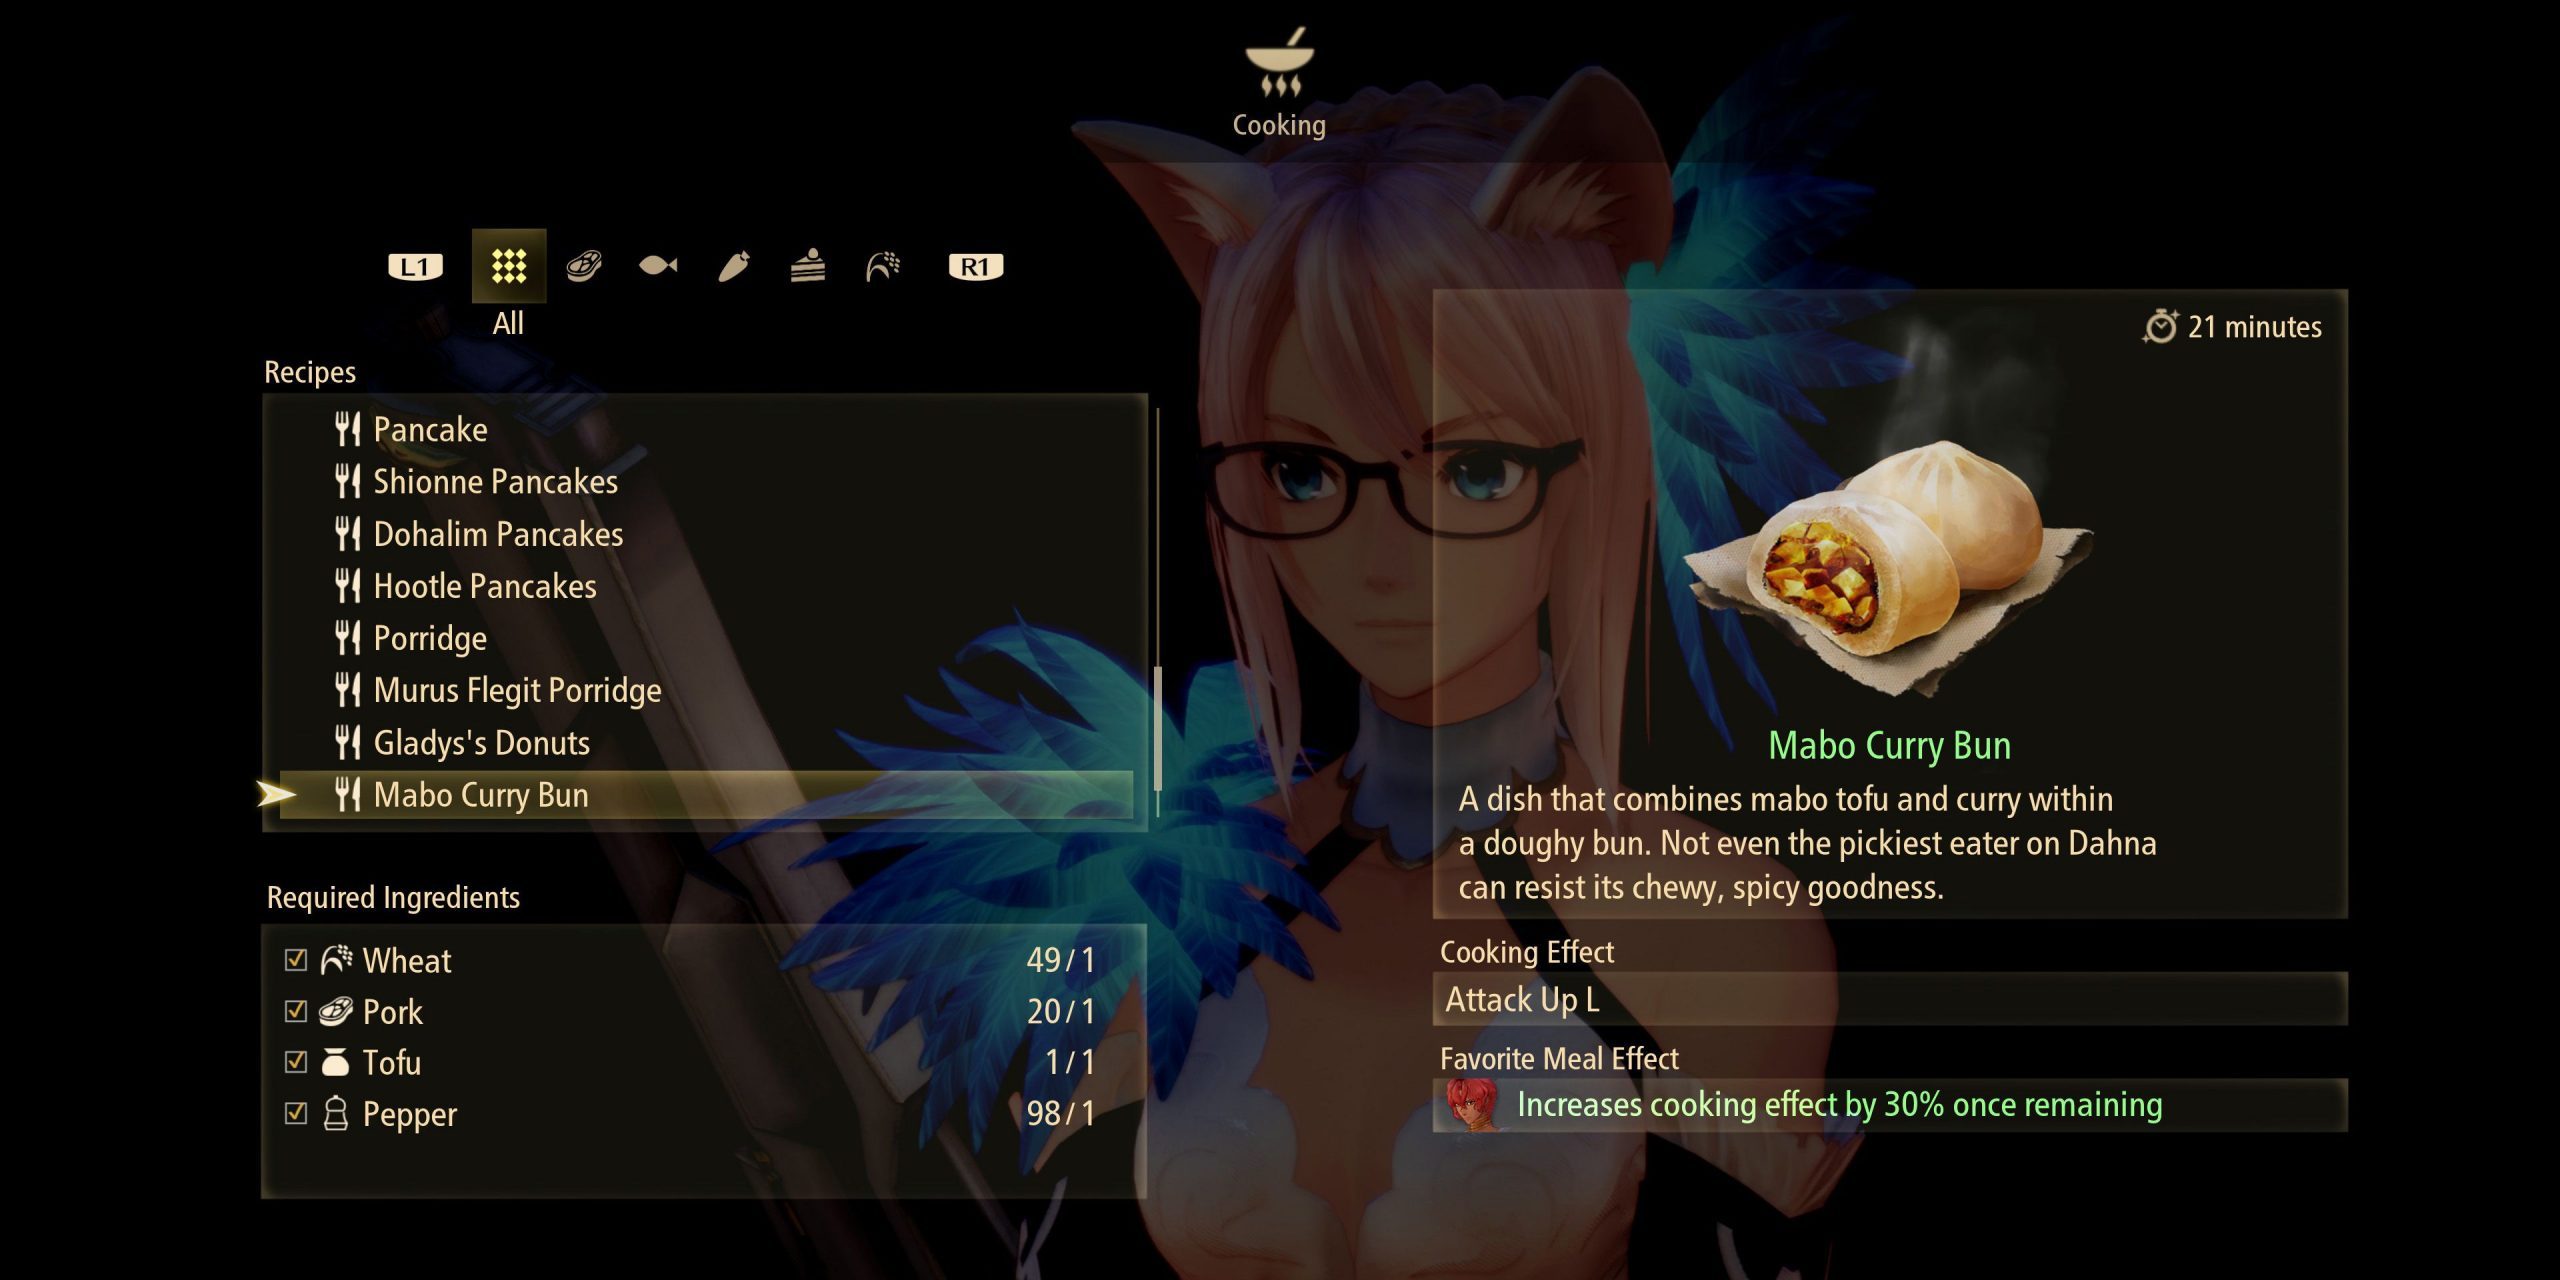 tales-of-arise-cooking-recipes-35-mabo-curry-bun-6656960